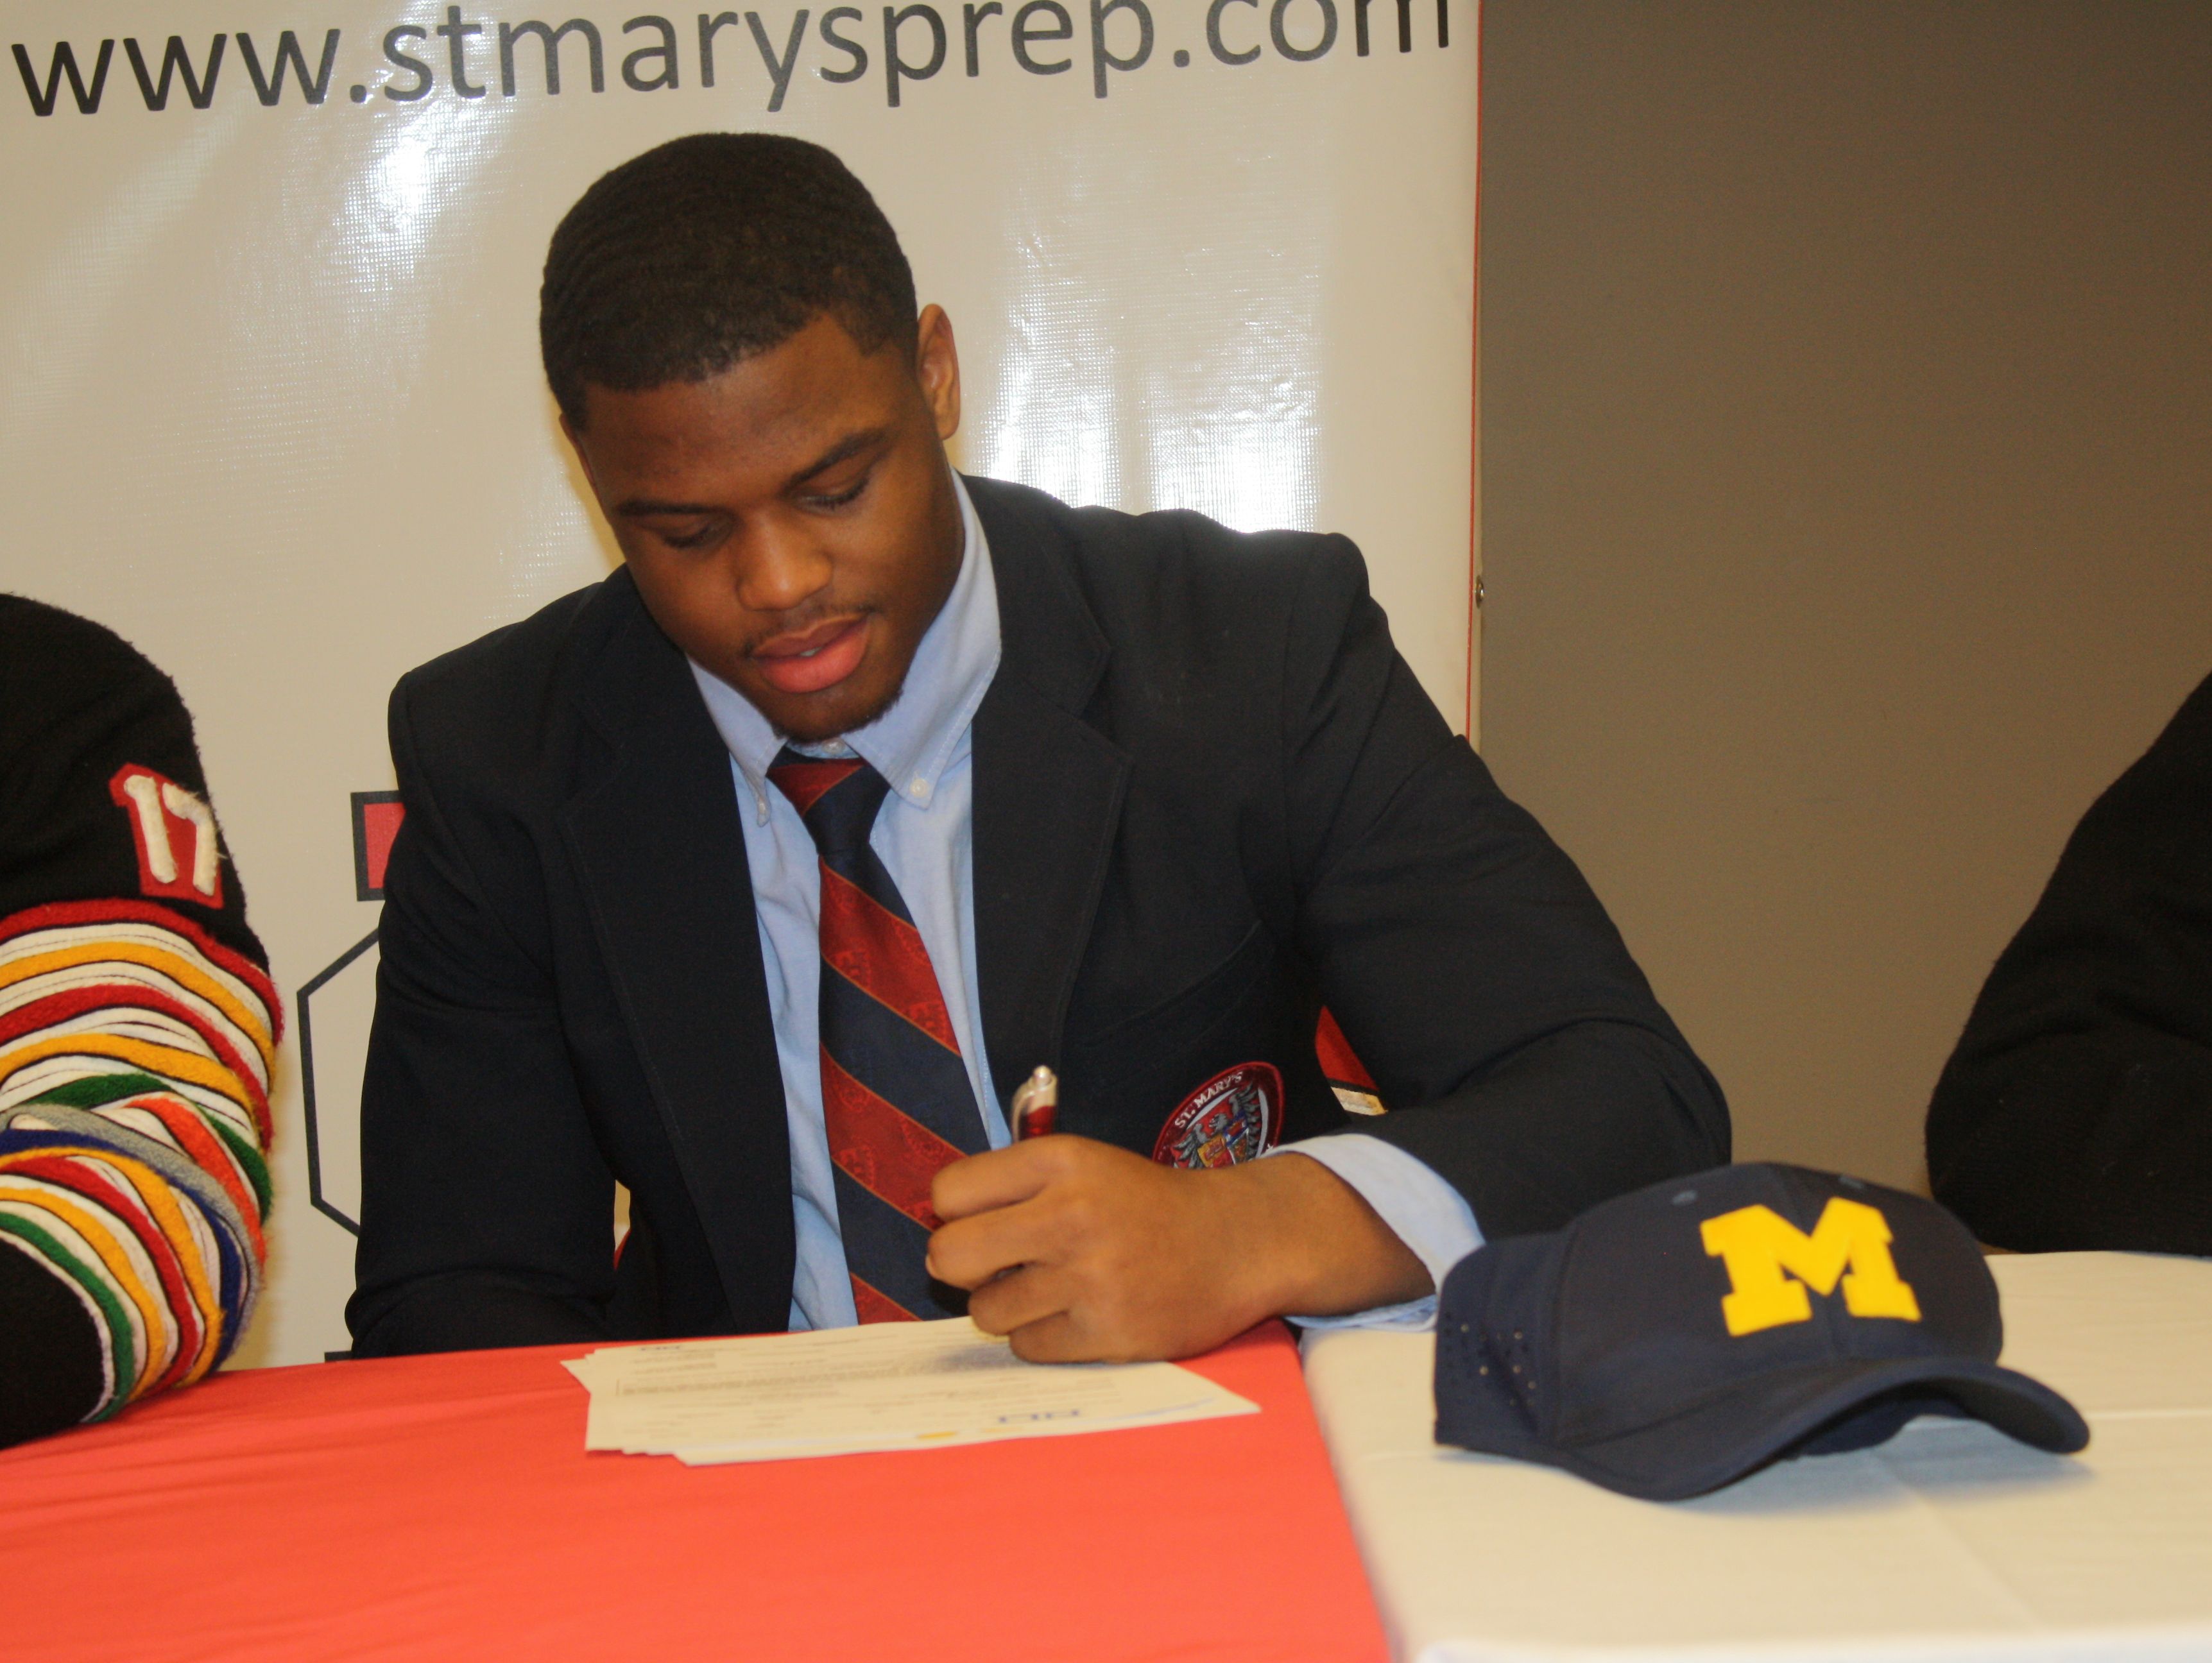 Orchard Lake St. Mary's linebacker Josh Ross signs on the dotted line to officially become a Michigan Wolverine on Wednesday after verbally committing in March 2016.